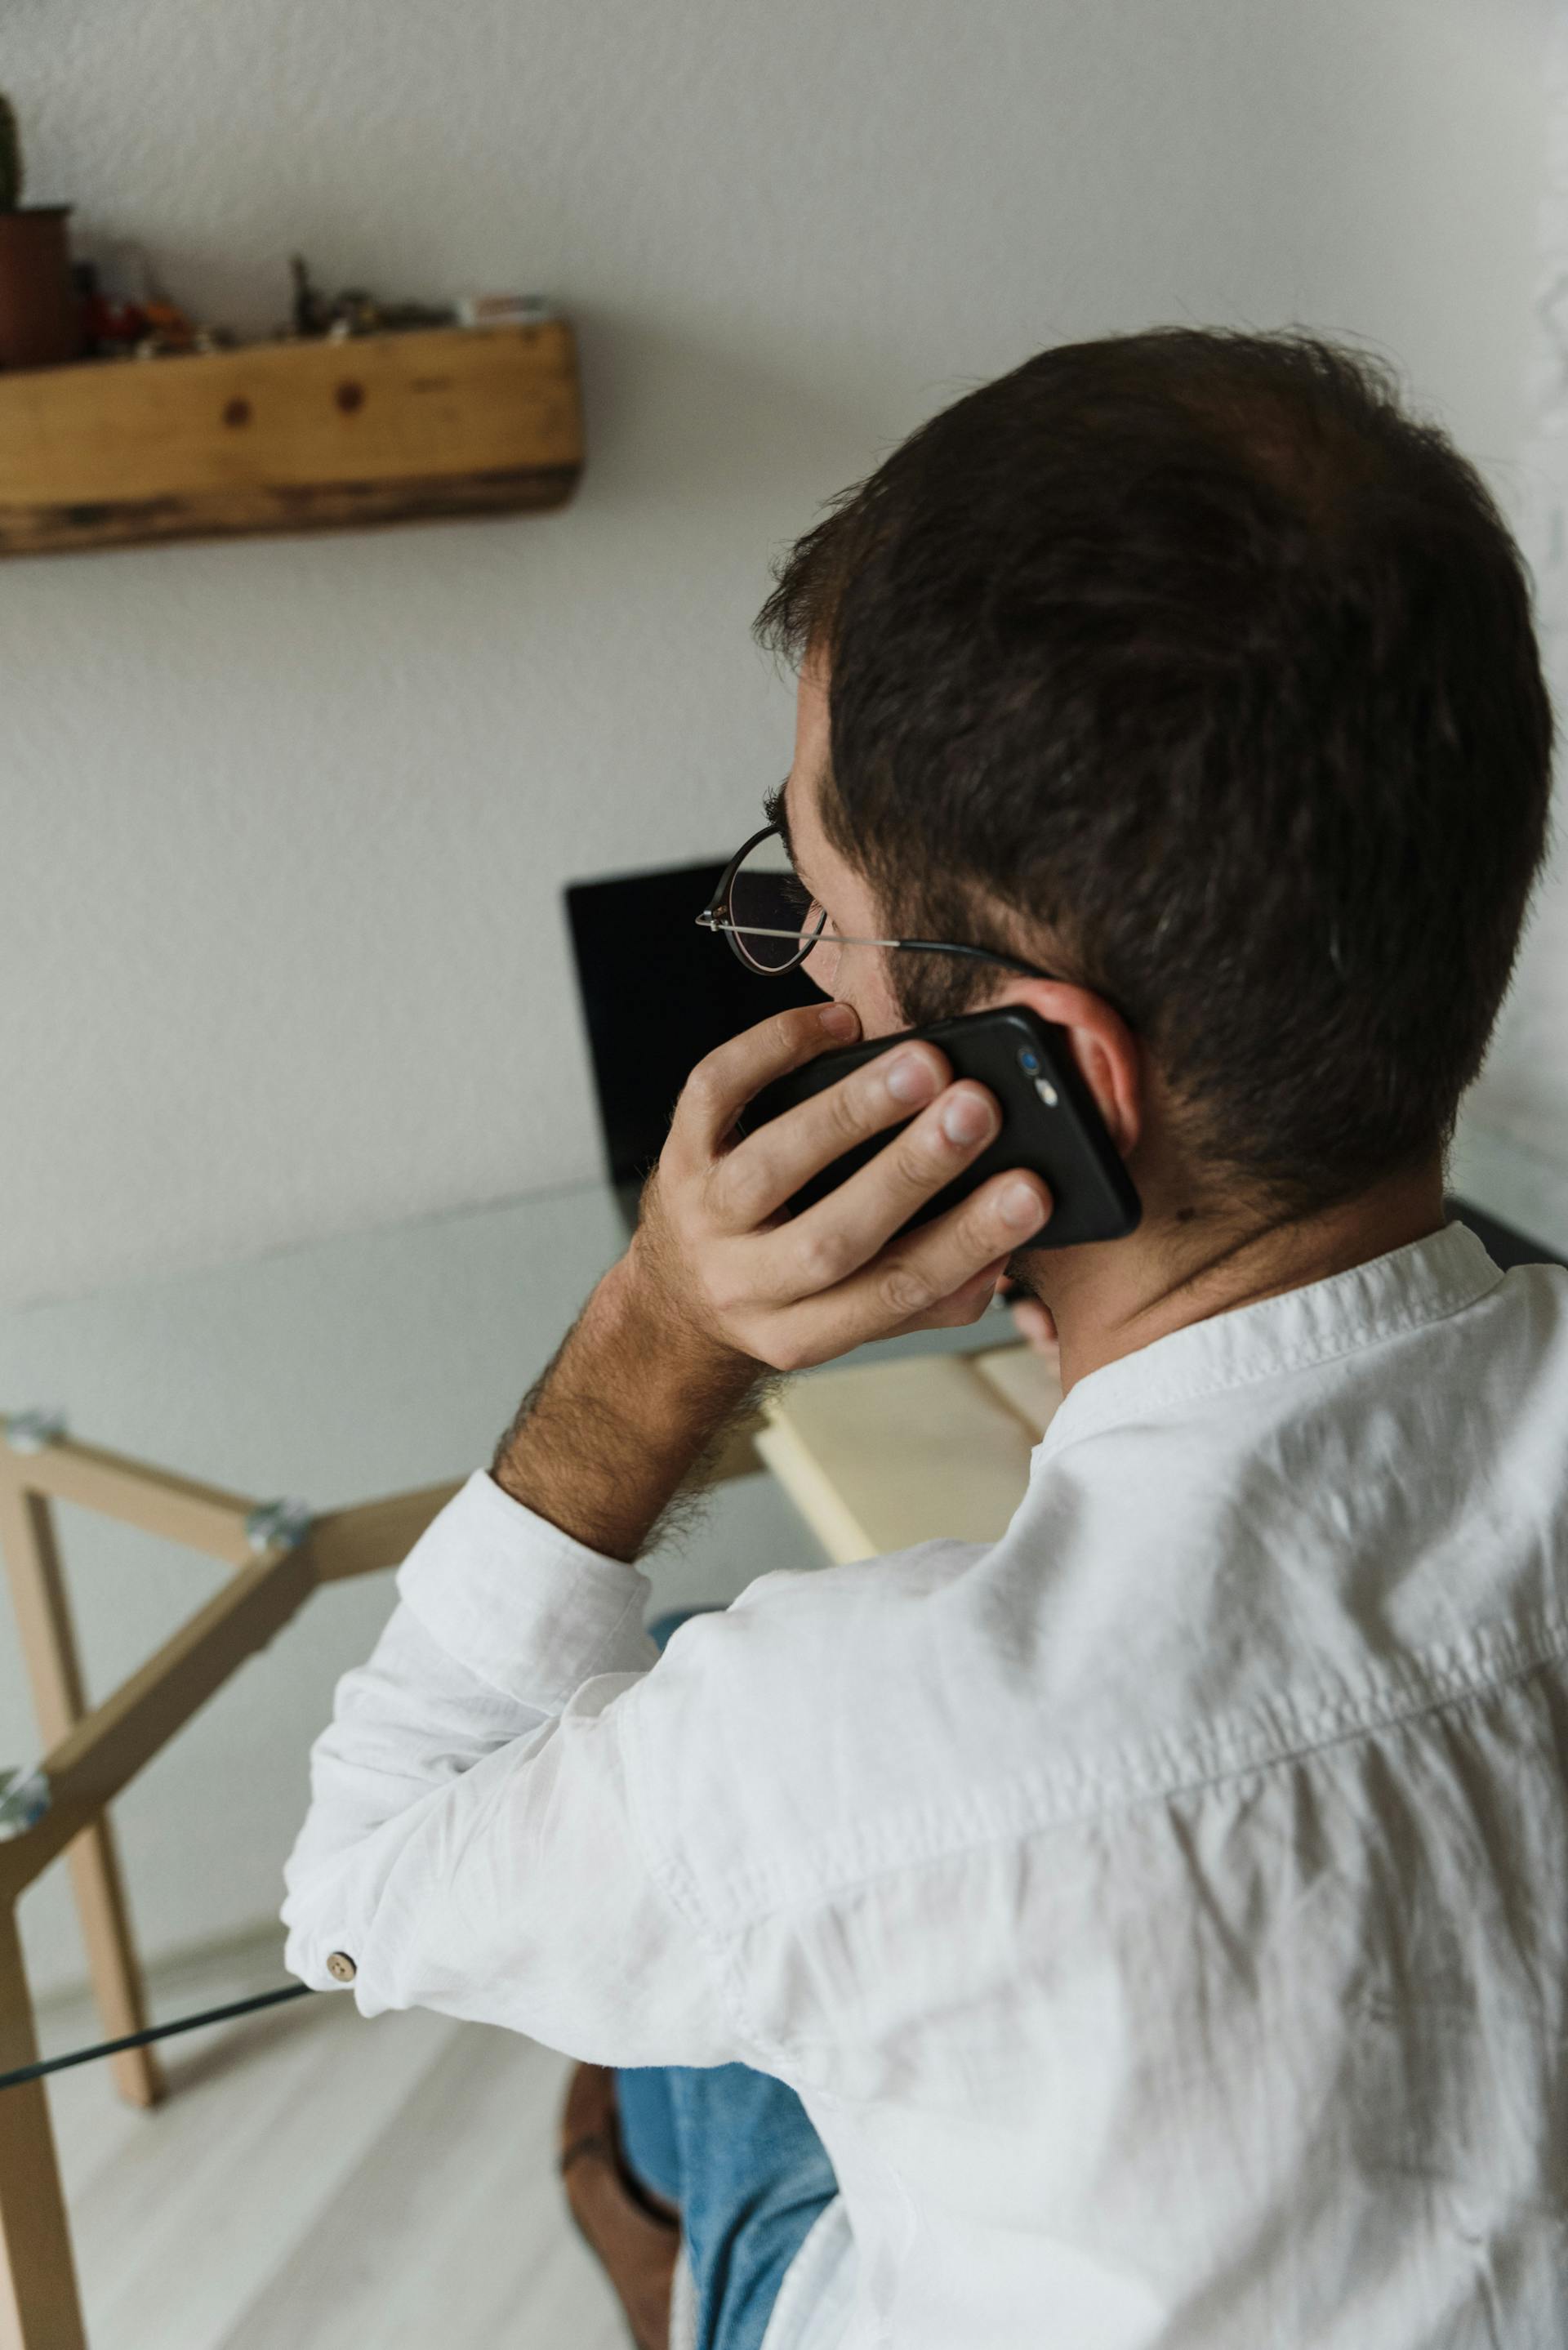 A man talking on the phone | Source: Pexels